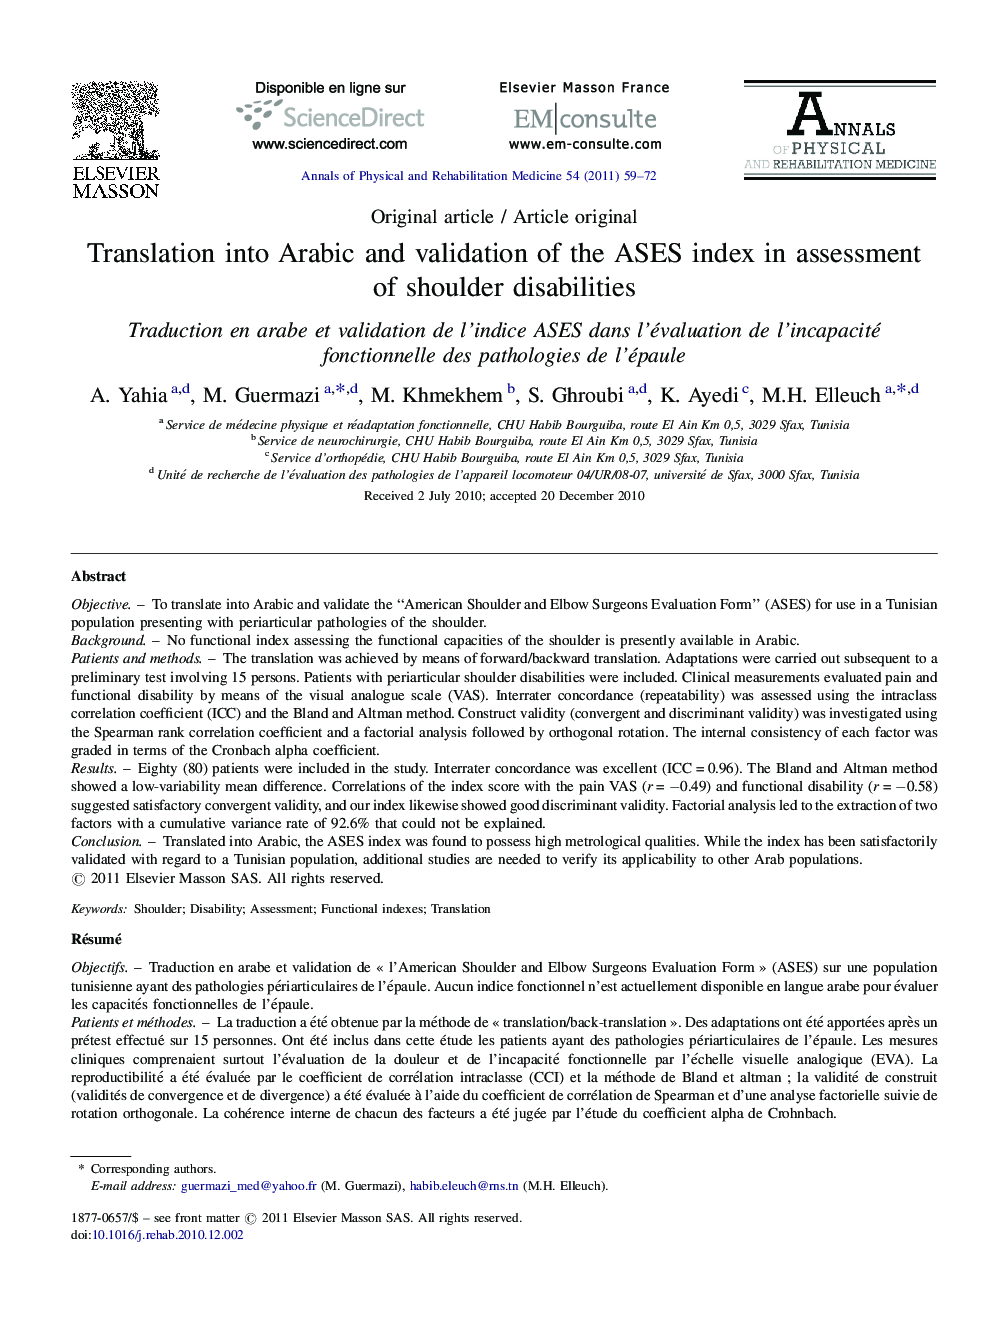 Translation into Arabic and validation of the ASES index in assessment of shoulder disabilities